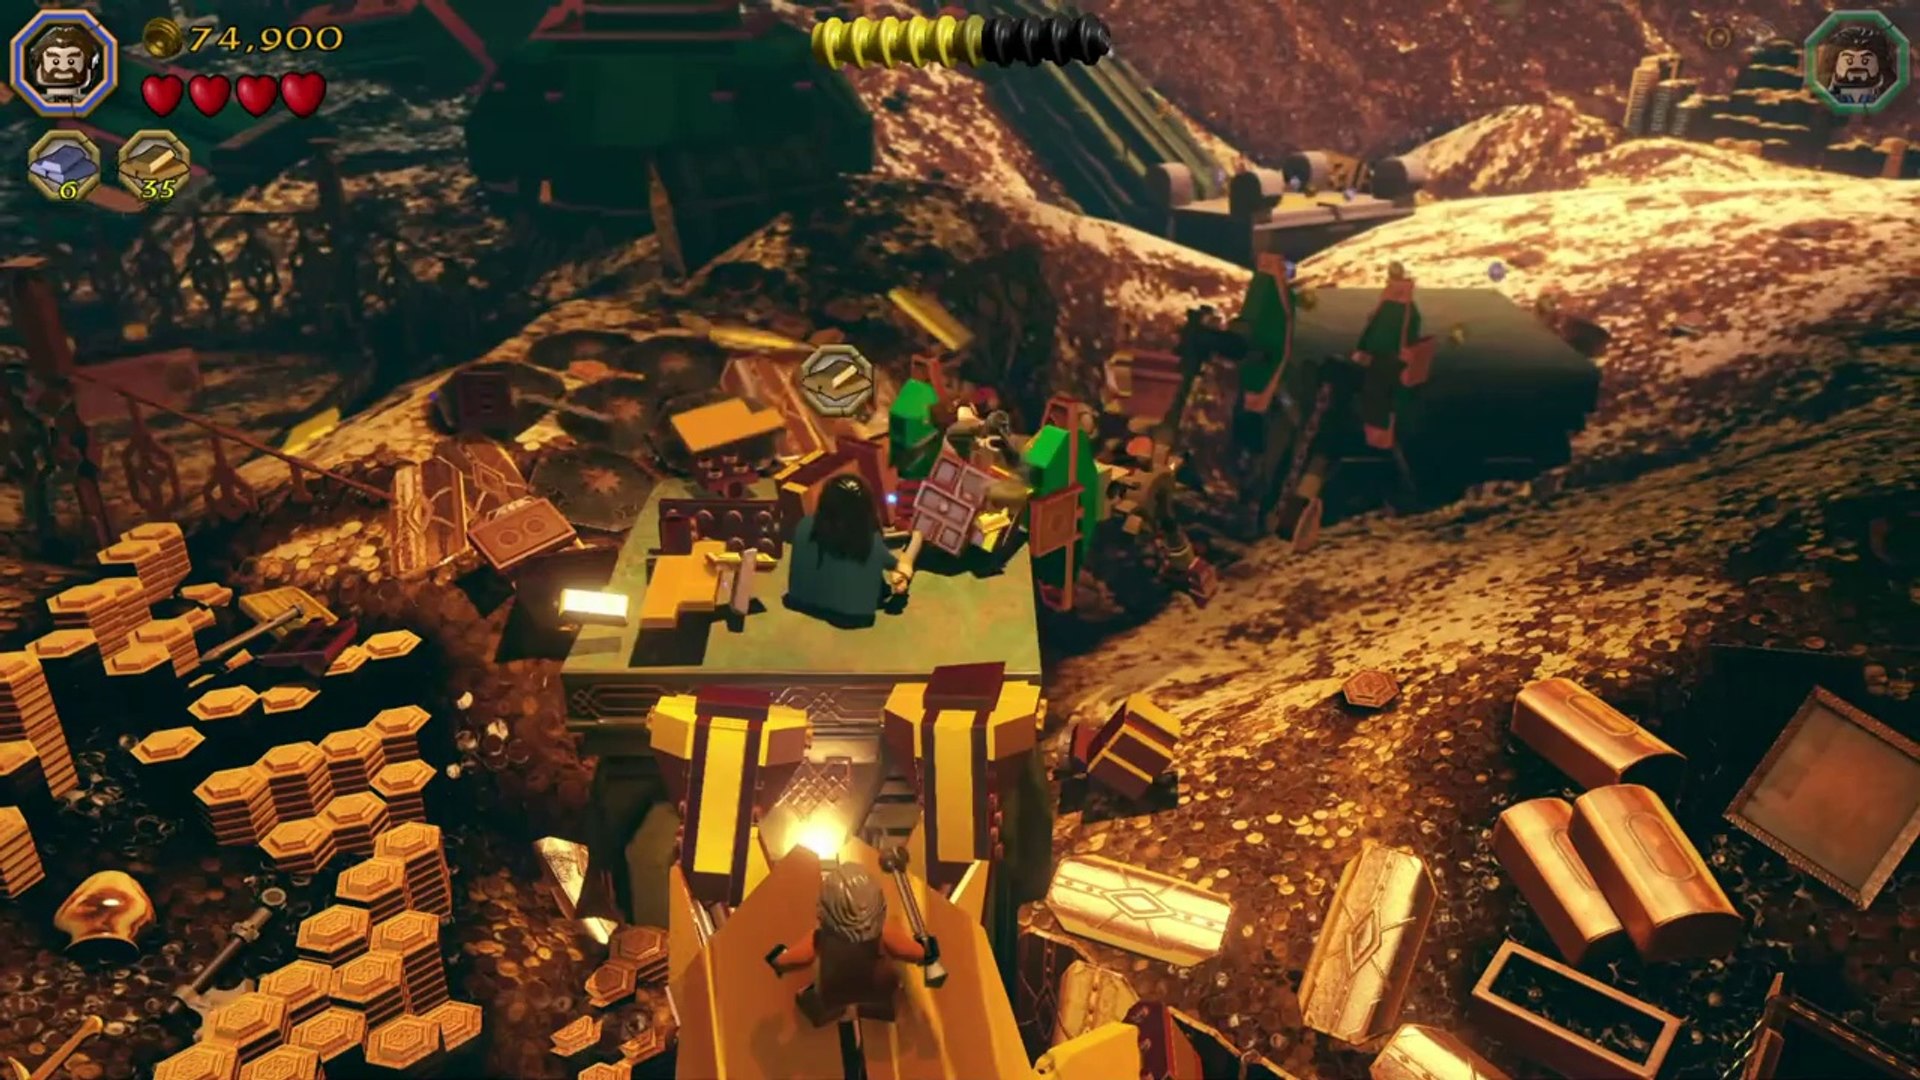 Lego The Hobbit PS4 Gameplay 1080P Part 2 - video Dailymotion